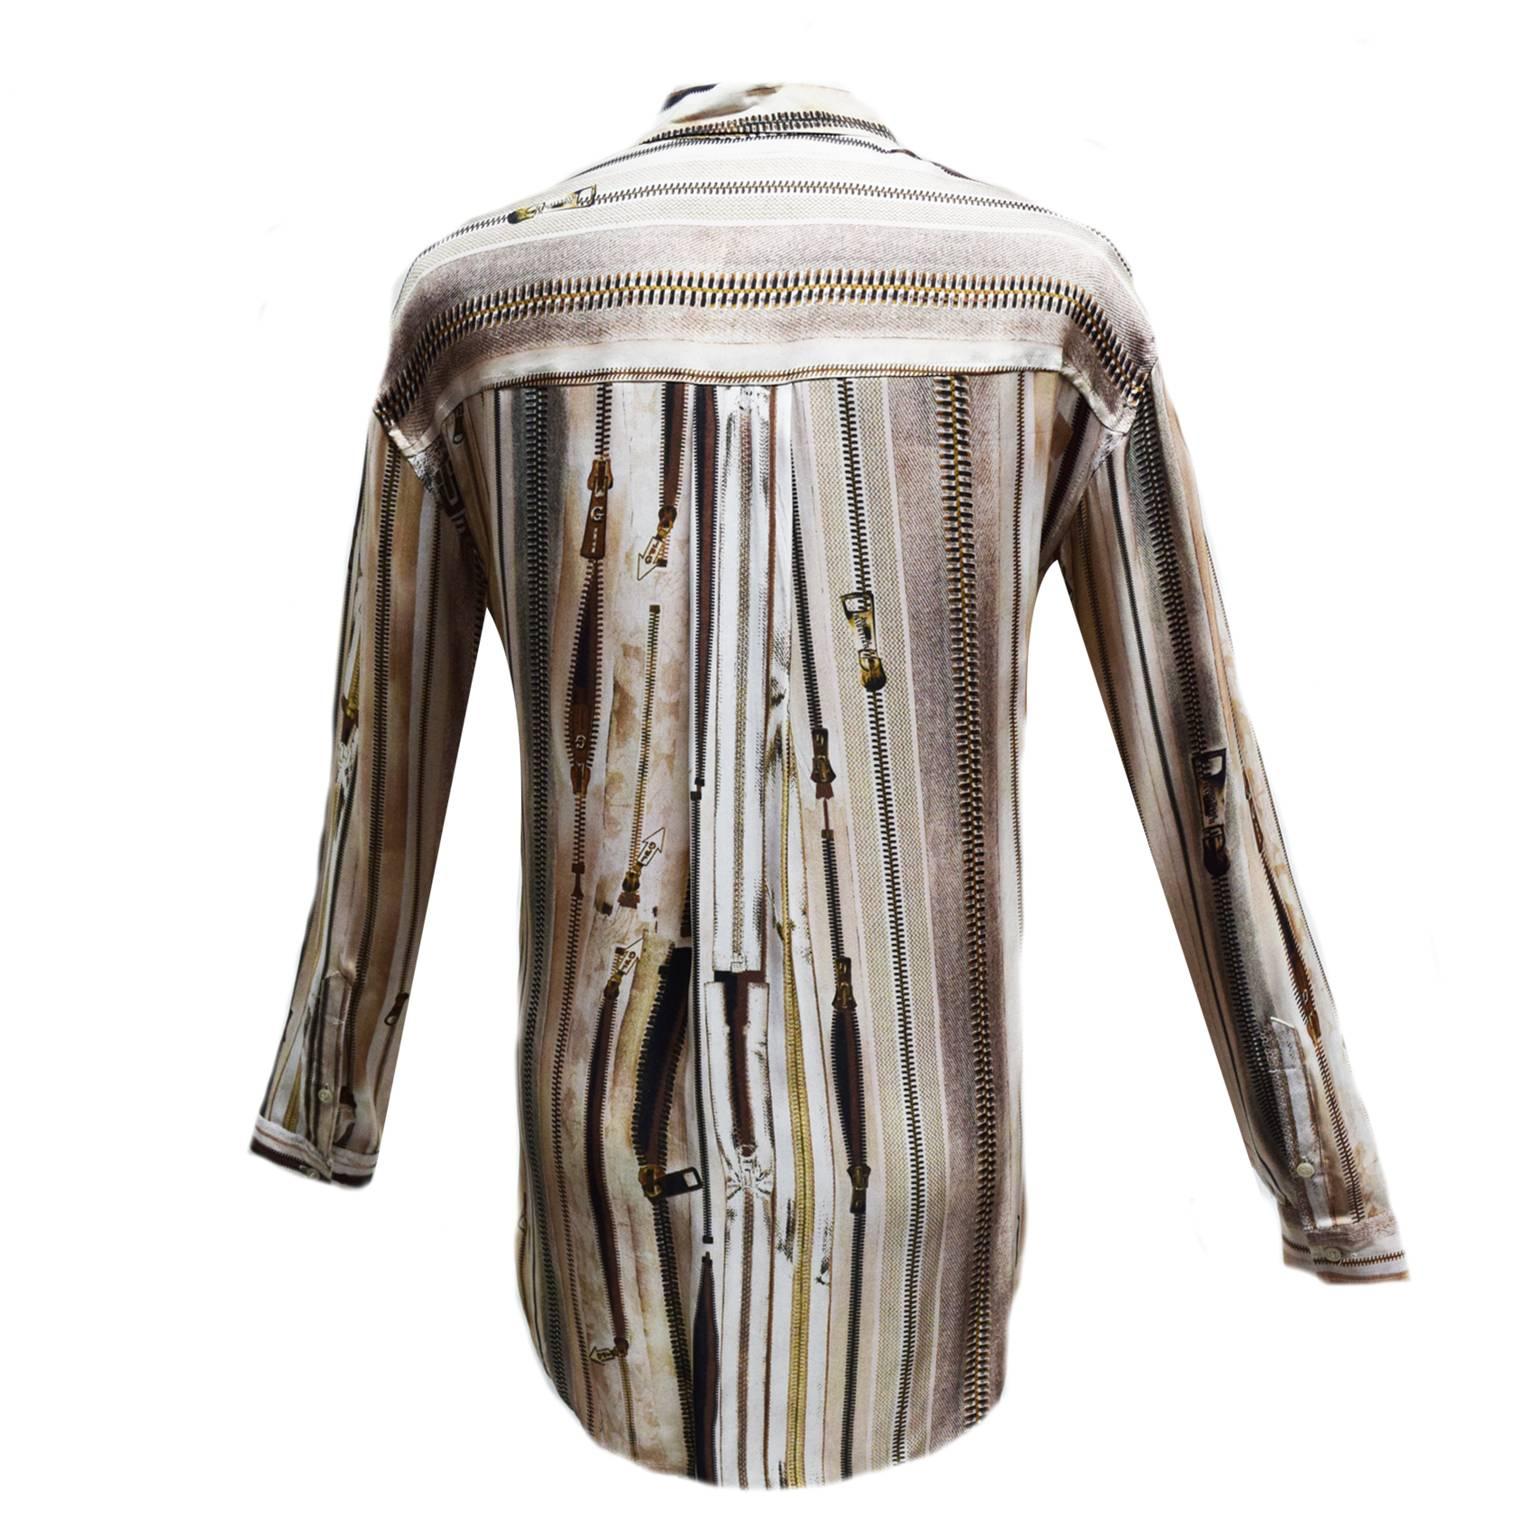 This Jean Paul Gaultier blouse is a monochromatic neutral zipper print and is long sleeved.  The front has a zipper detail and is 100% silk. 